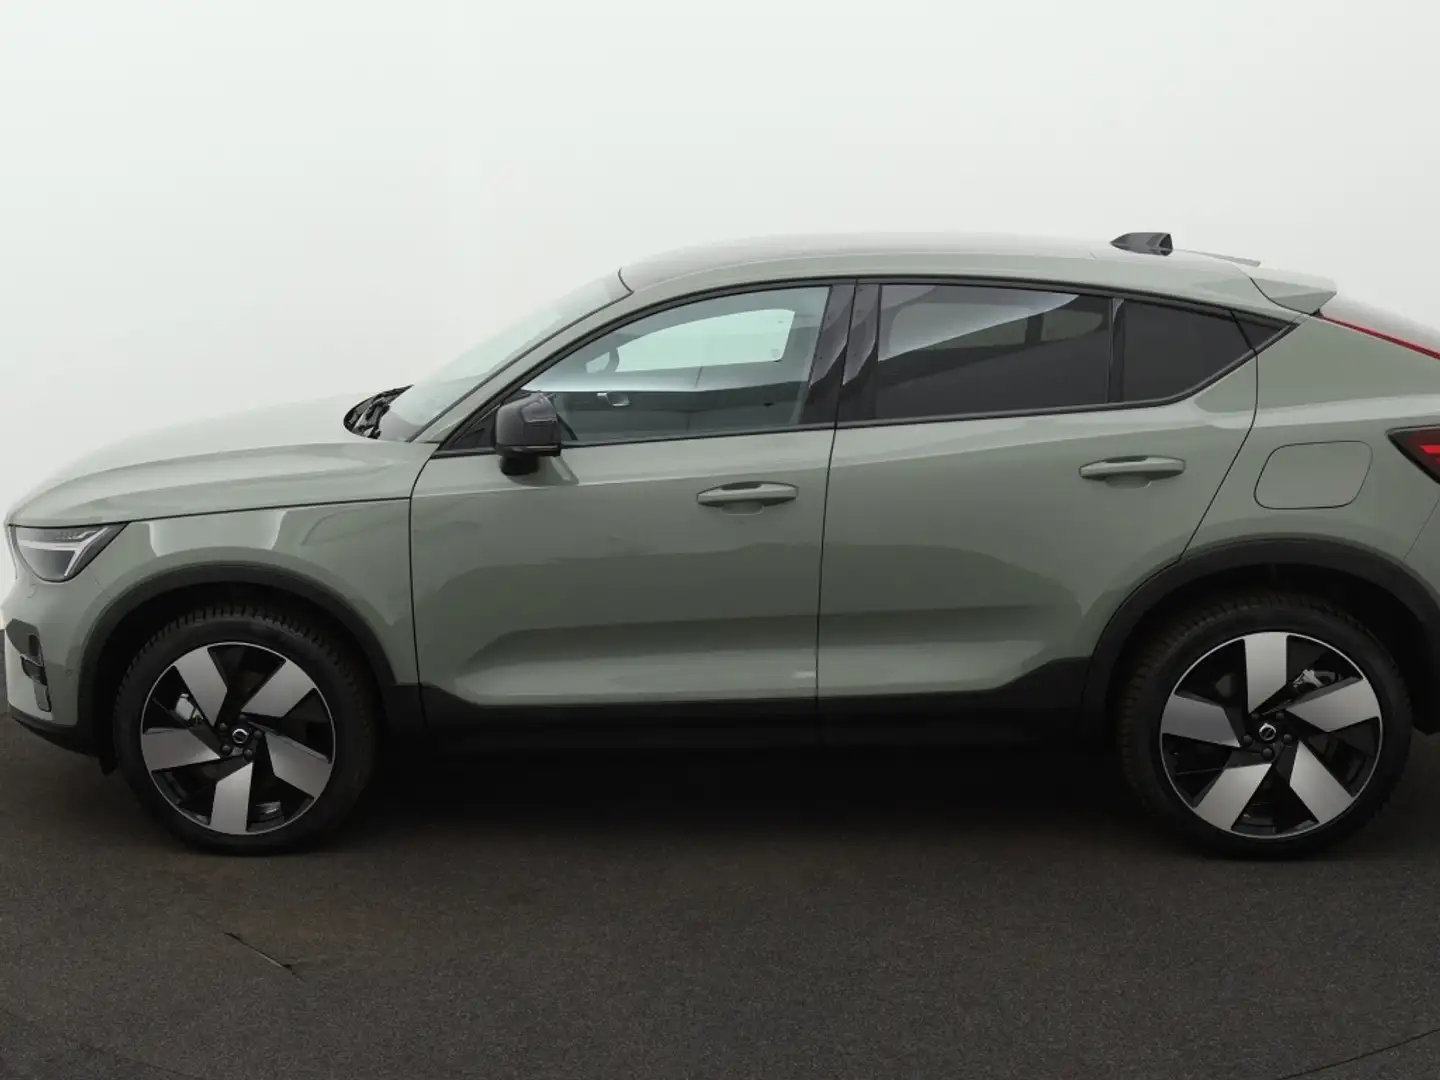 Volvo C40 Extended Plus 82 kWh | 20 inch wielen | privacy gl zelena - 2